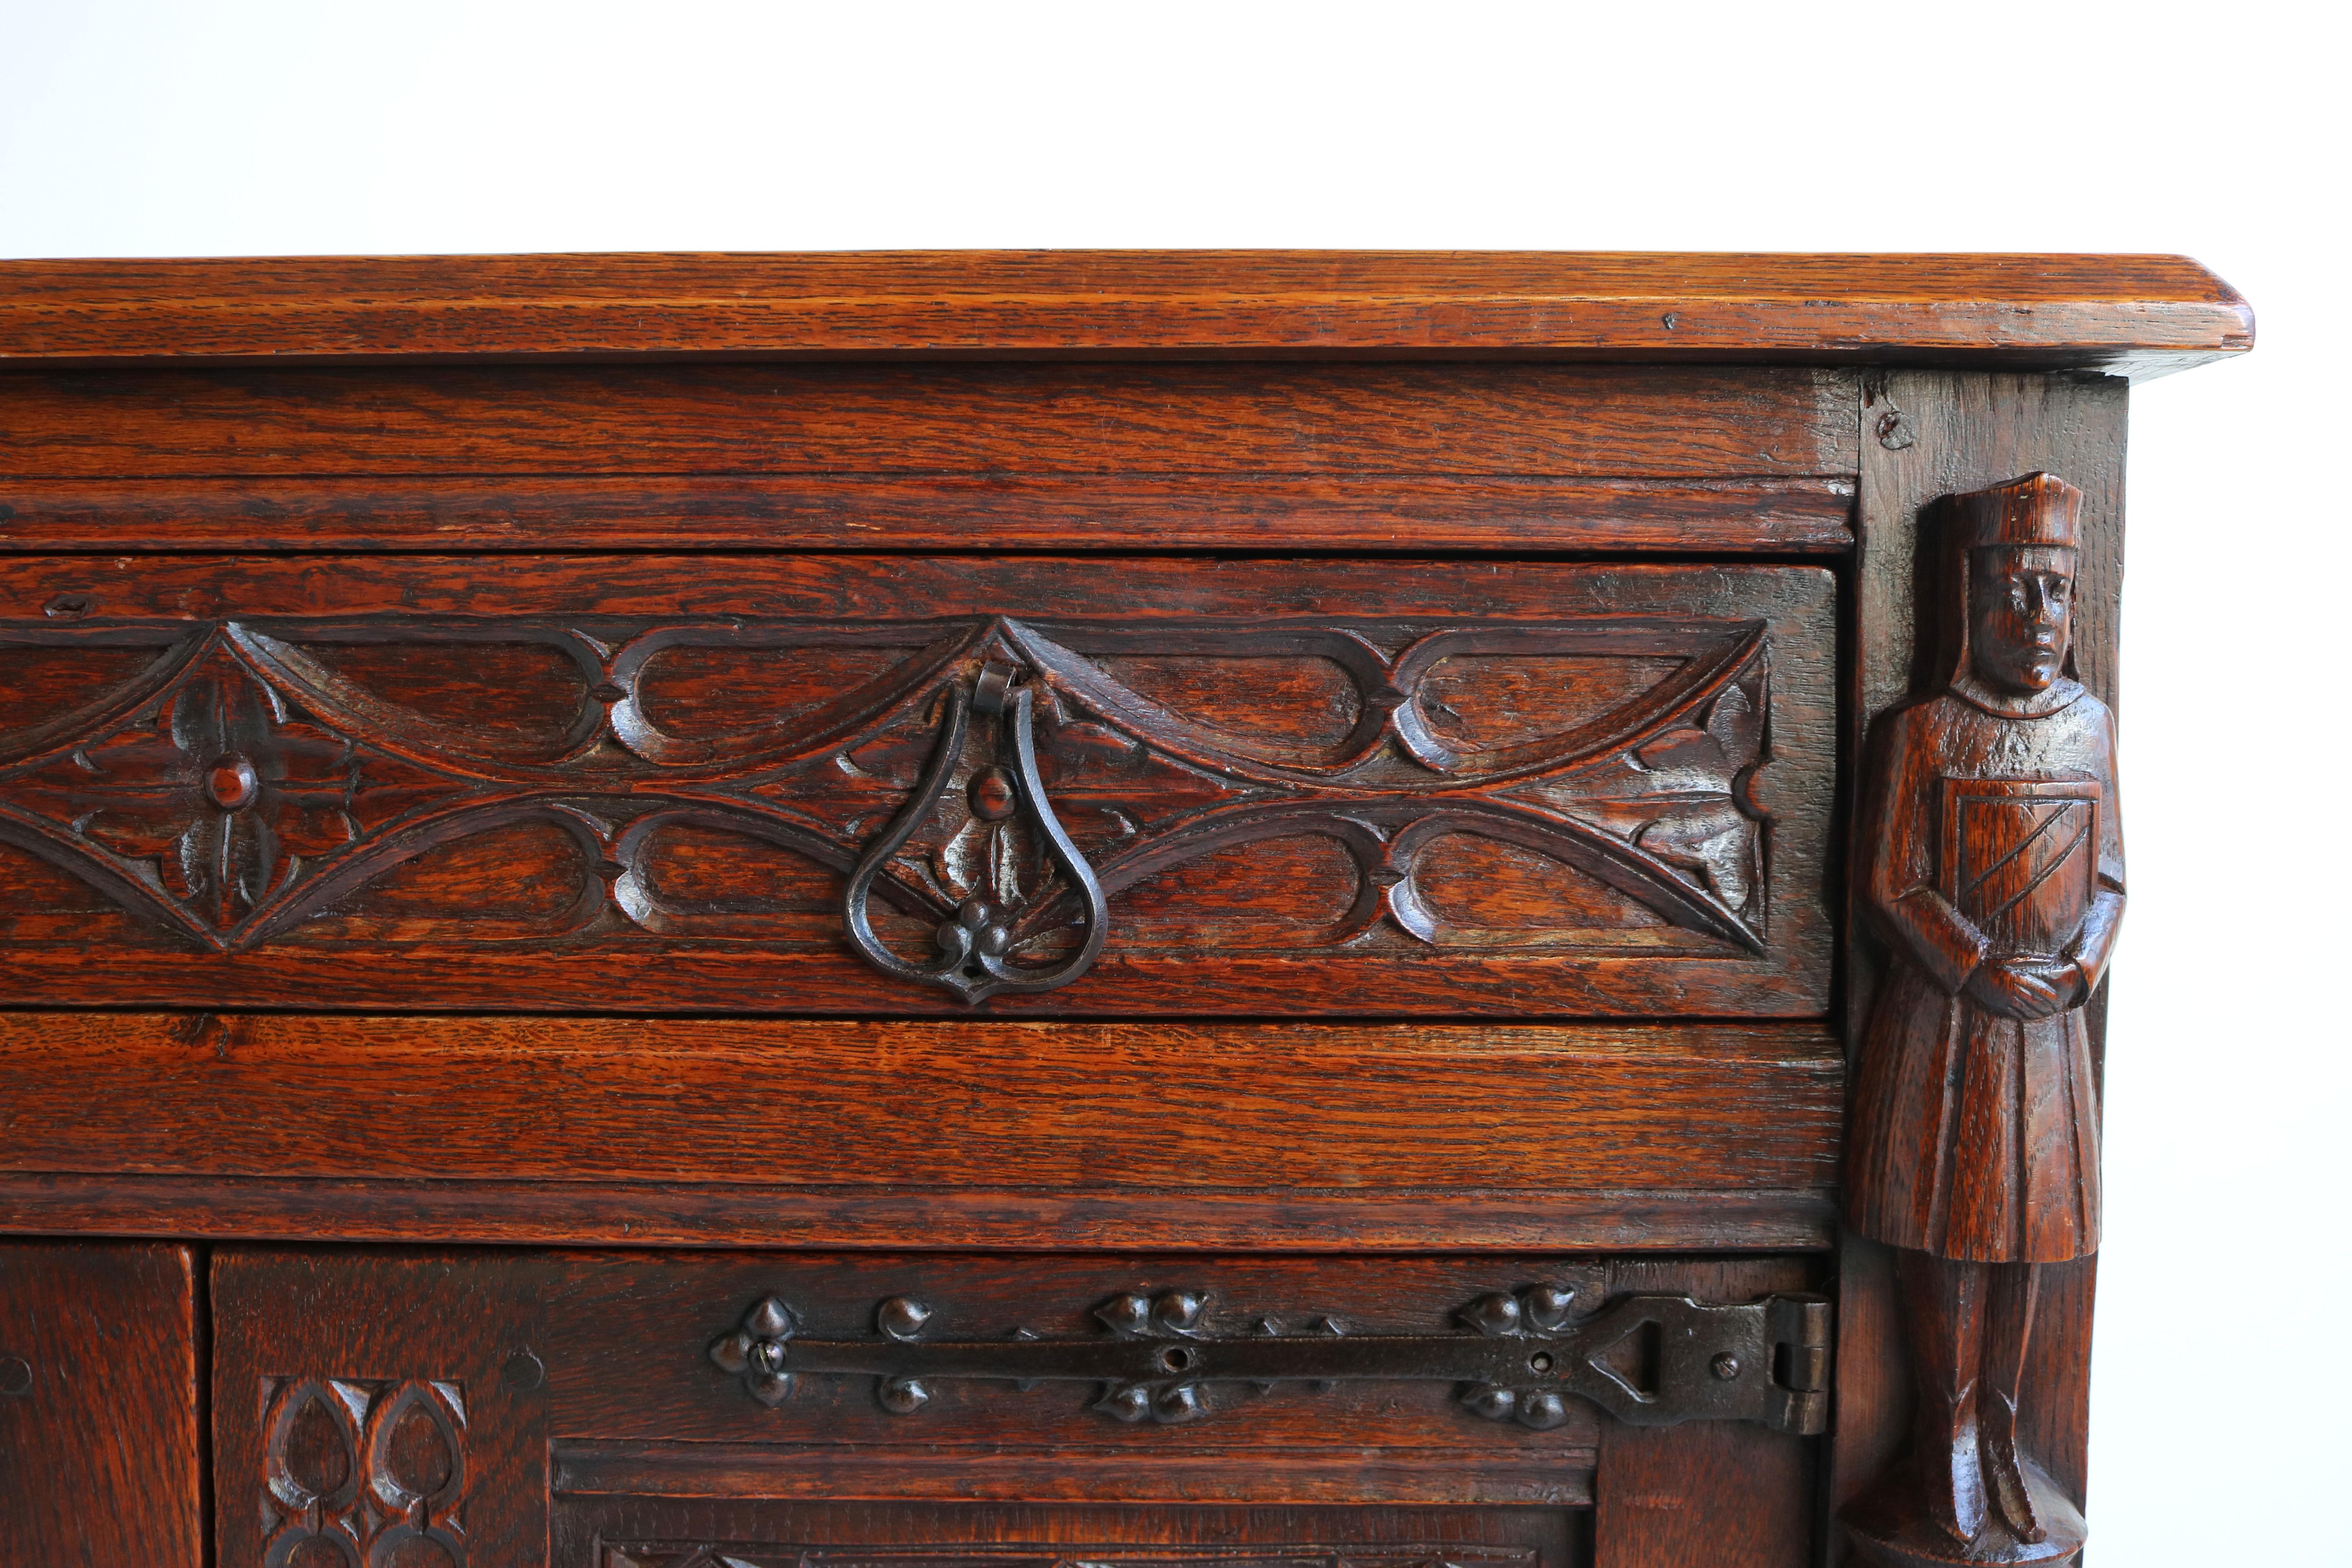 Early 20th Century French Antique Gothic Revival Cabinet / Small Credenza 1920 Knights Carved Oak